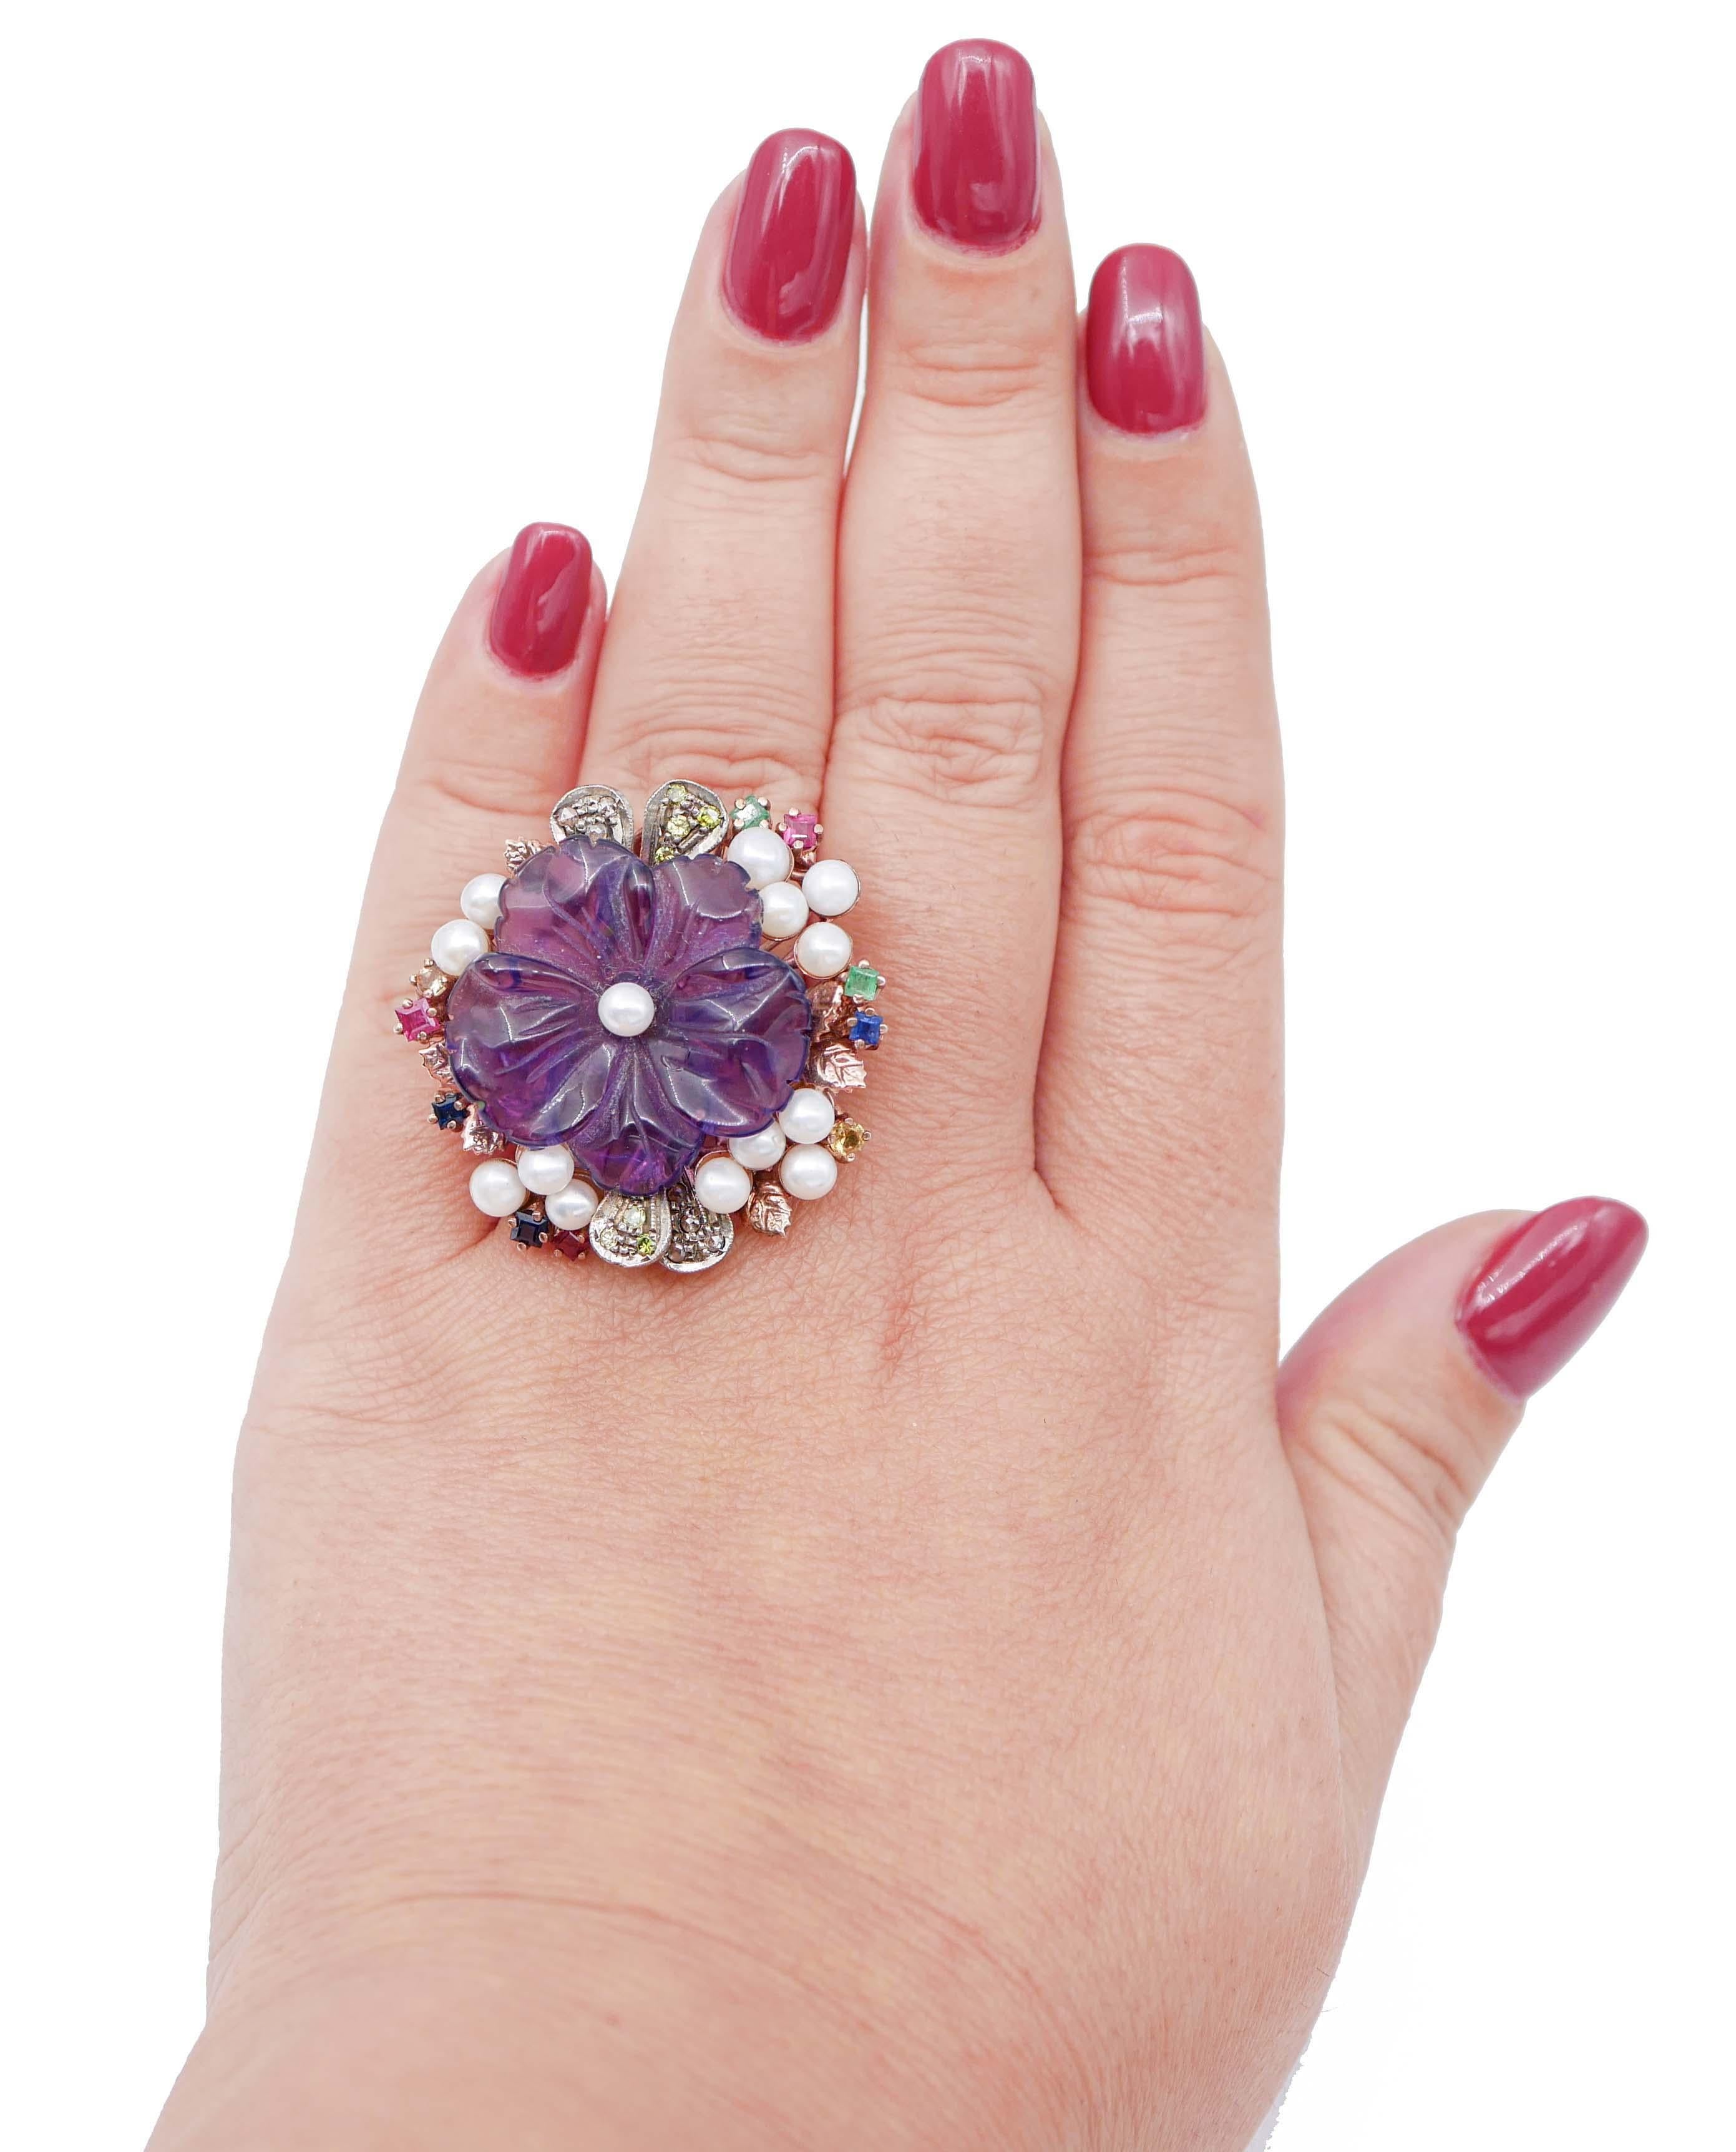 Mixed Cut Amethyst, Pearls, Rubies, Sapphires, Emeralds, Diamonds, Gold and Silver Ring For Sale